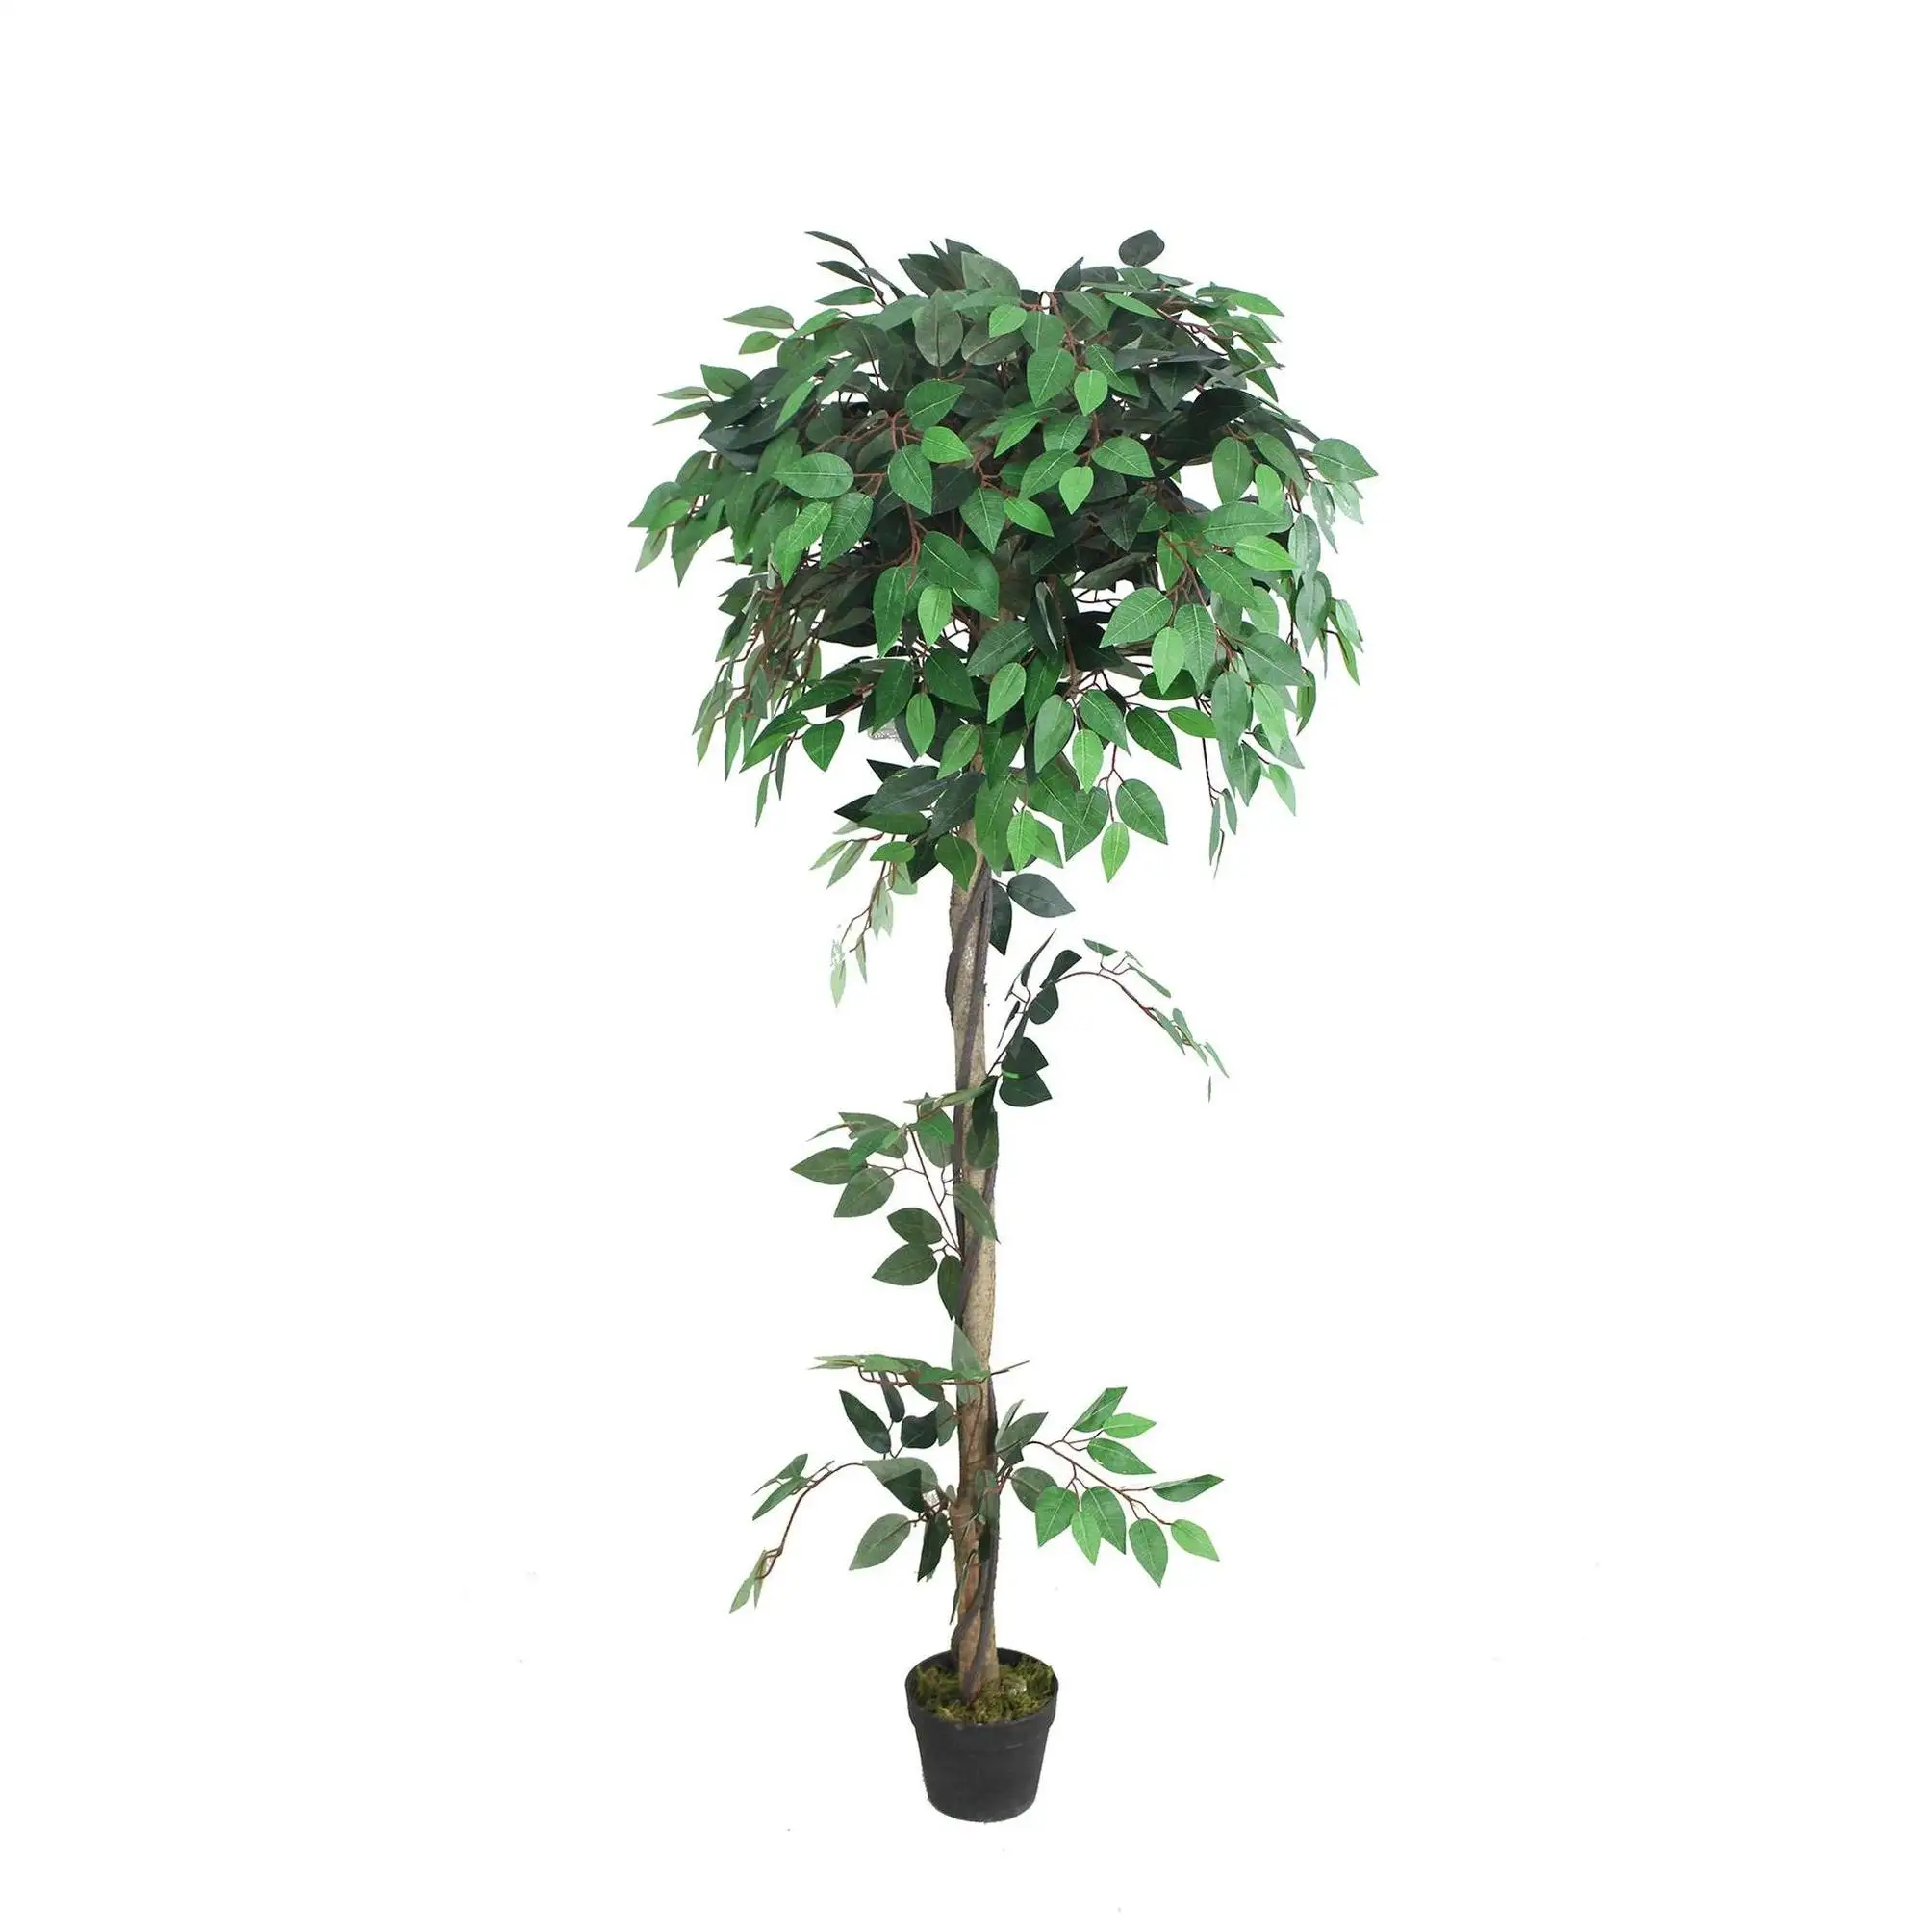 Artificial Flower Box Set Potted Oem/Odm High Quality Banyan Trees Japanese Artificial Cherry Blossom Tree For Decor